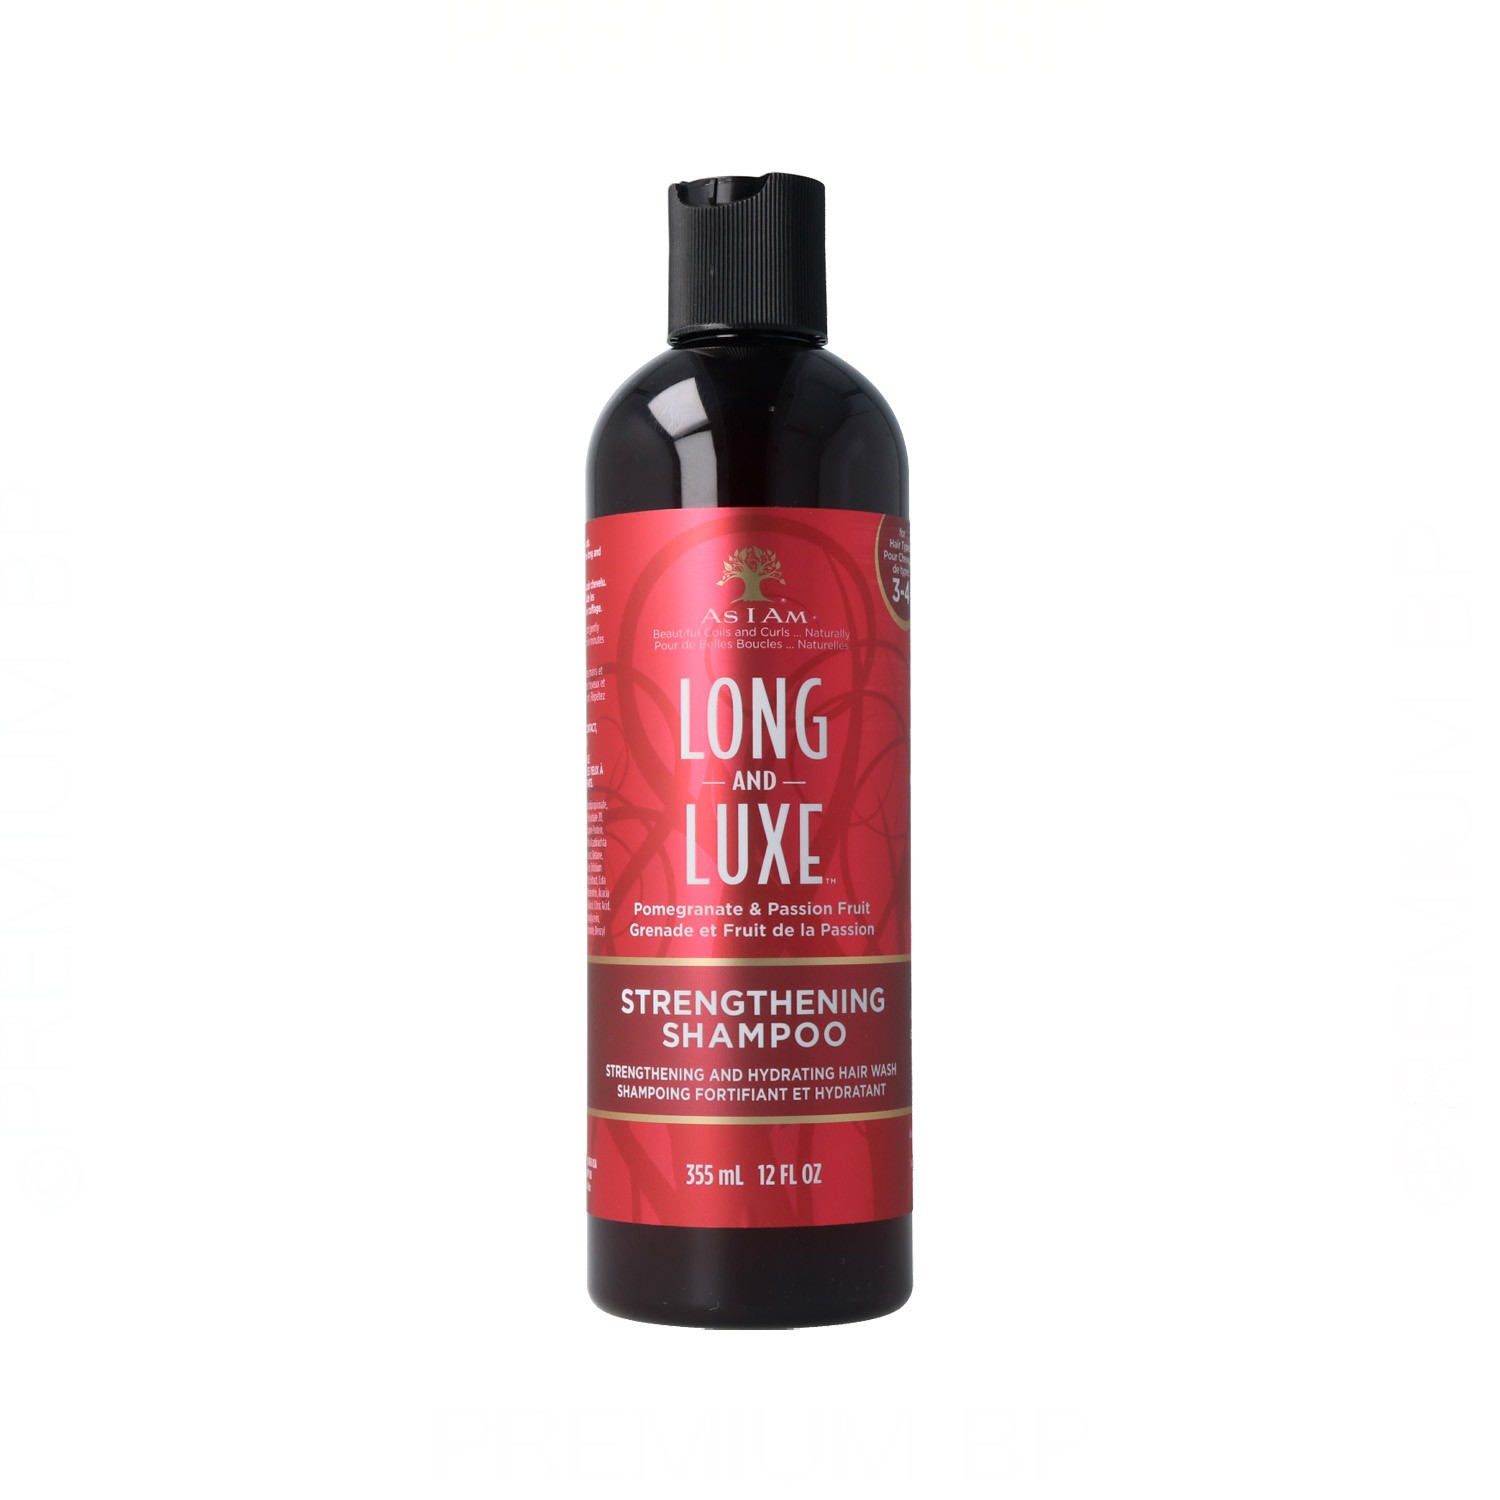 As I am Long and Luxe strengthening Shampoo